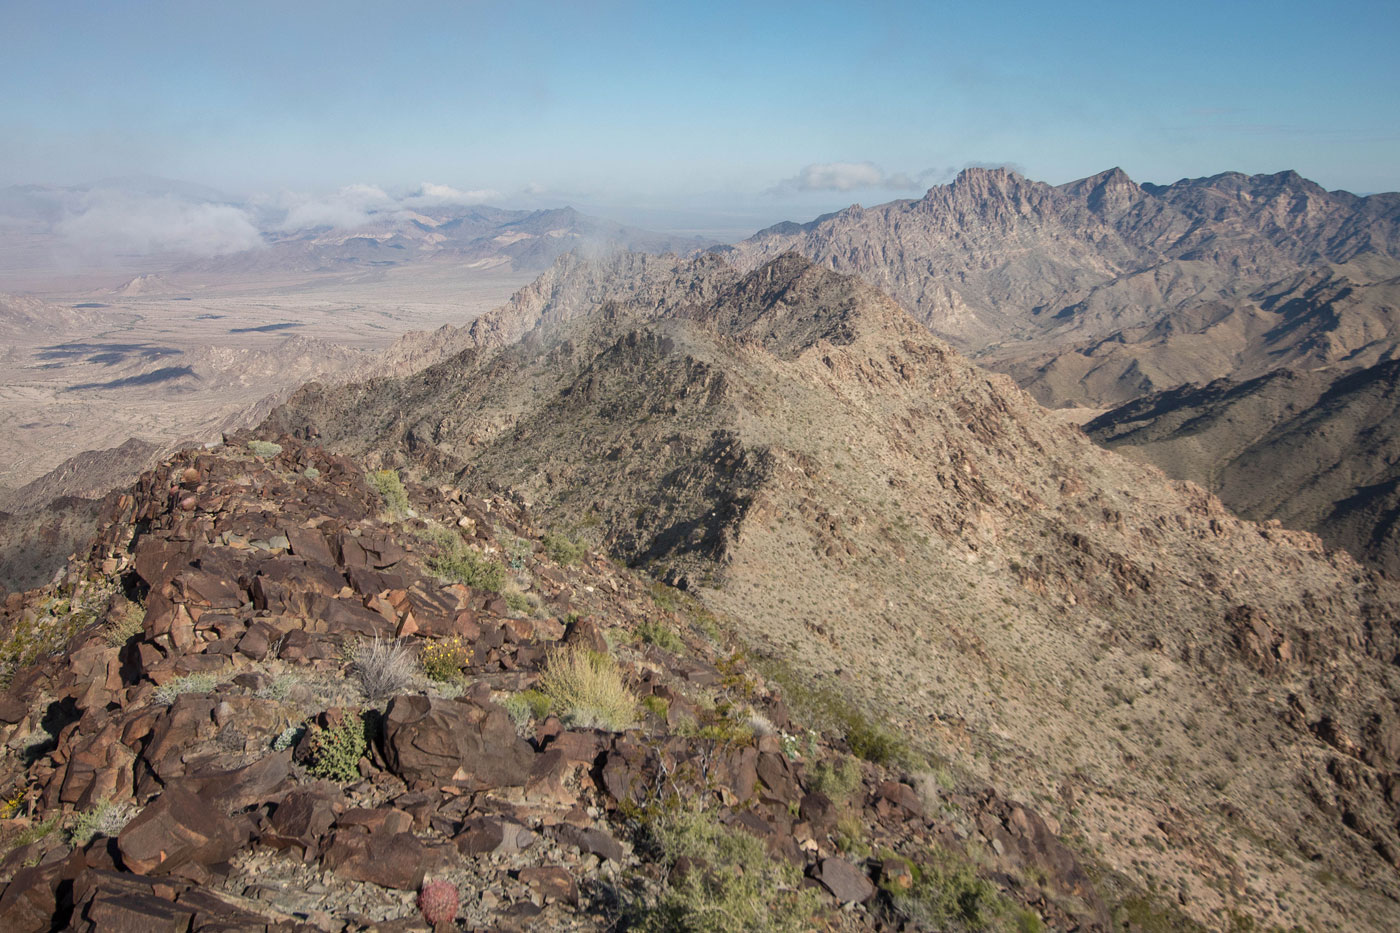 Hike South Maria Peak in Big Maria Mountains Wilderness Area BLM, California - Stav is Lost